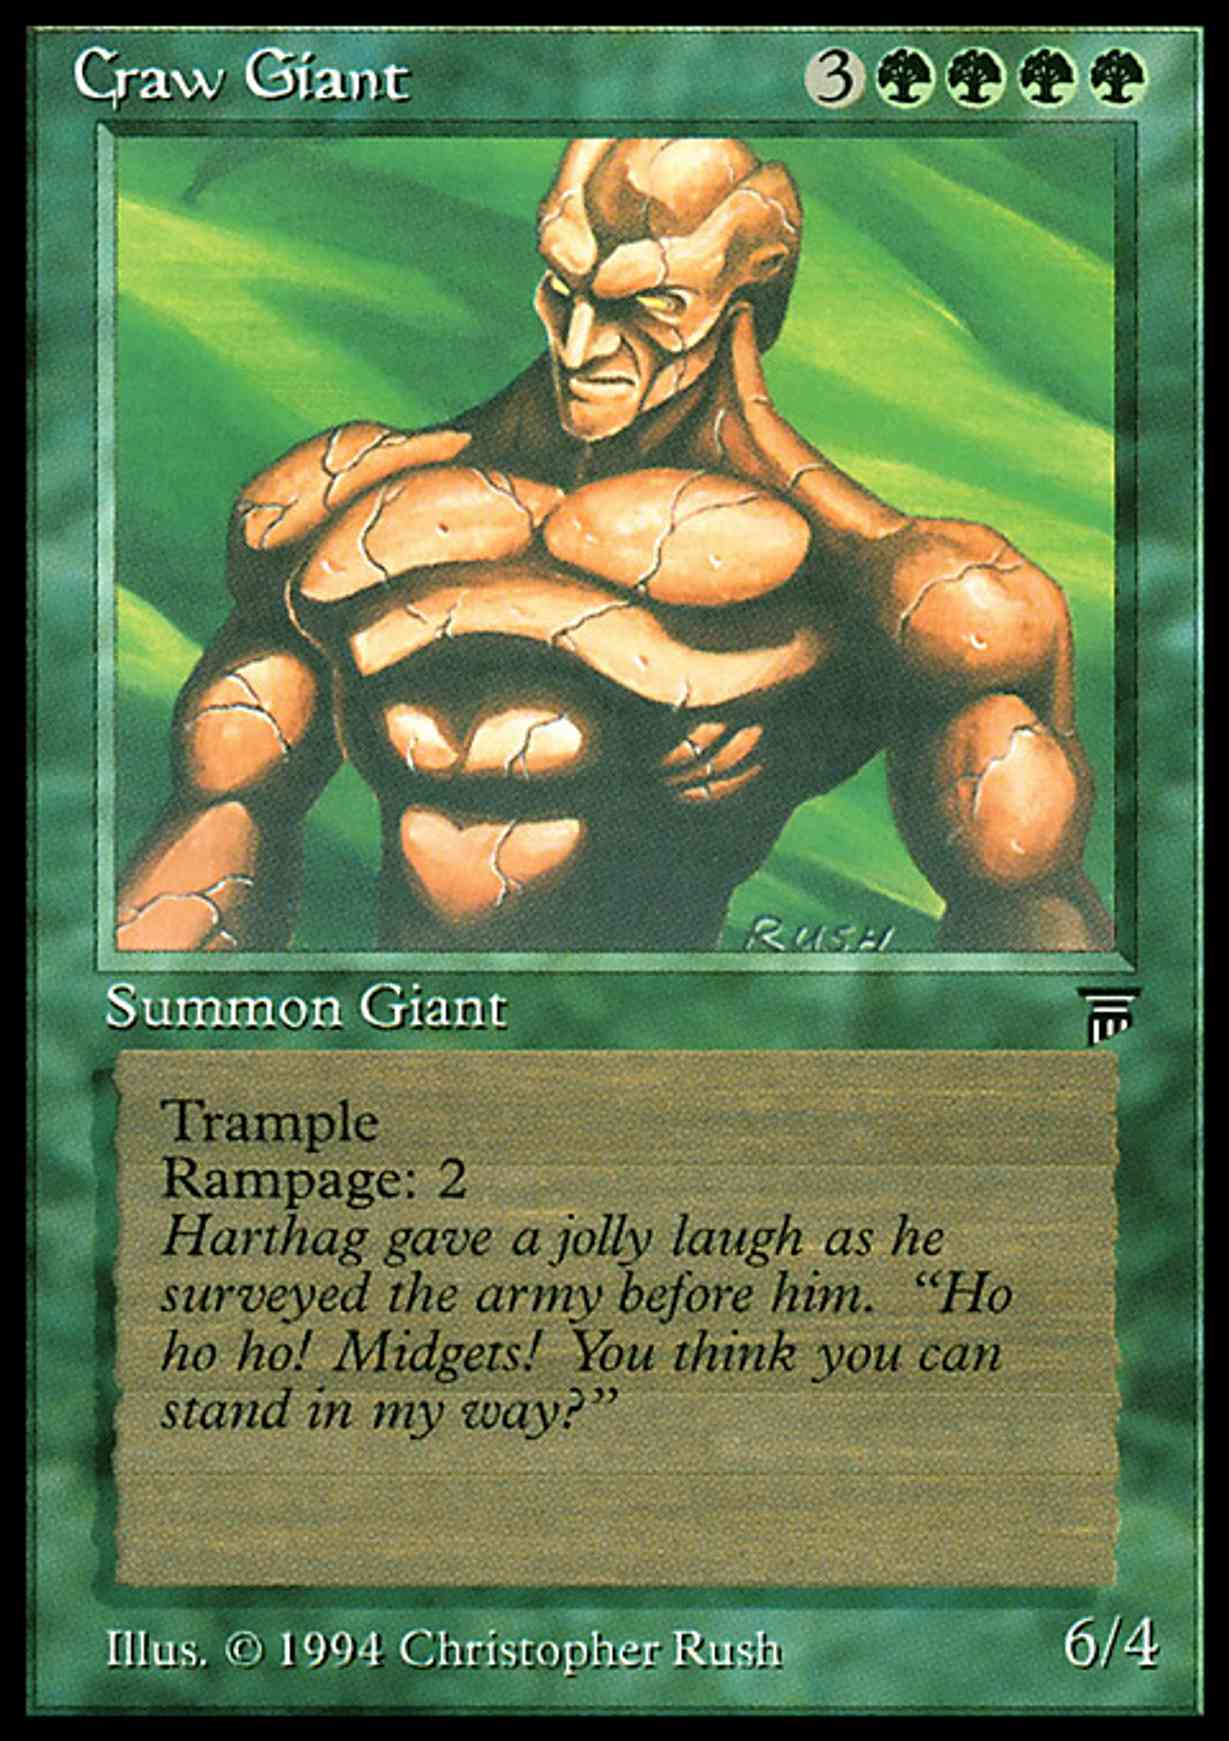 Craw Giant magic card front